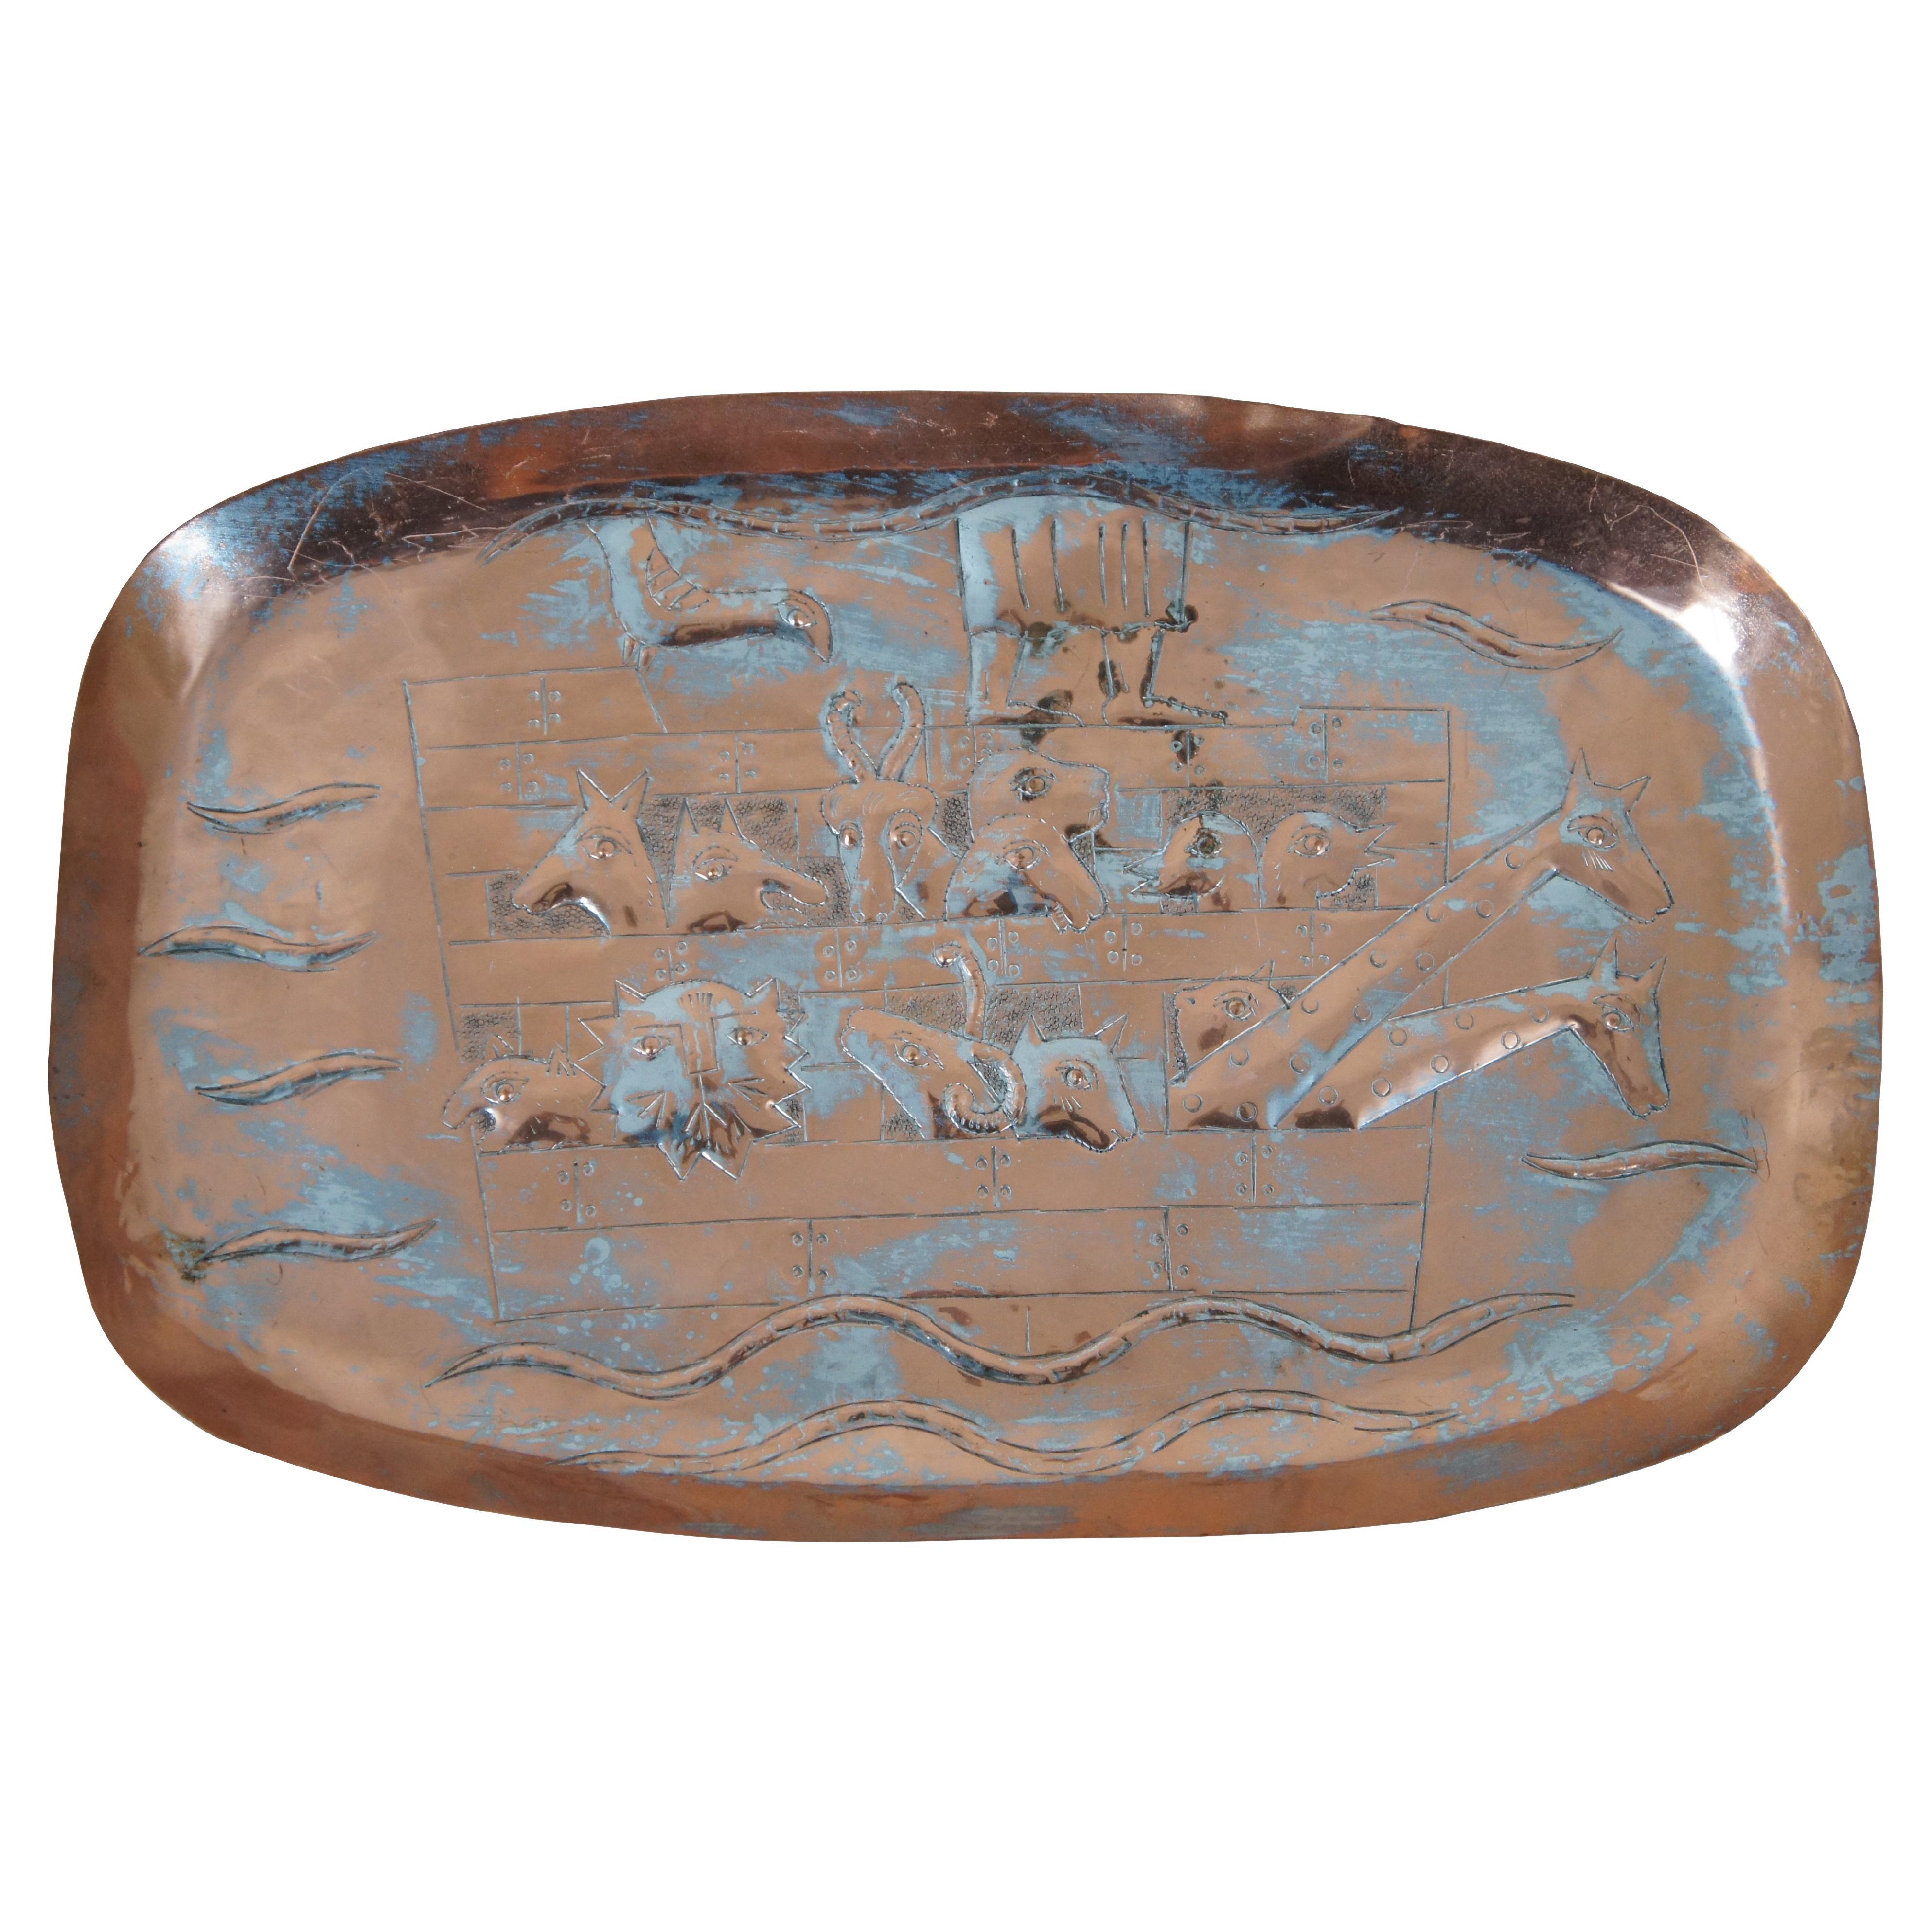 Vintage Israeli Messica Eetched Copper Noahs Ark Animal Tray Platter Judaica For Sale